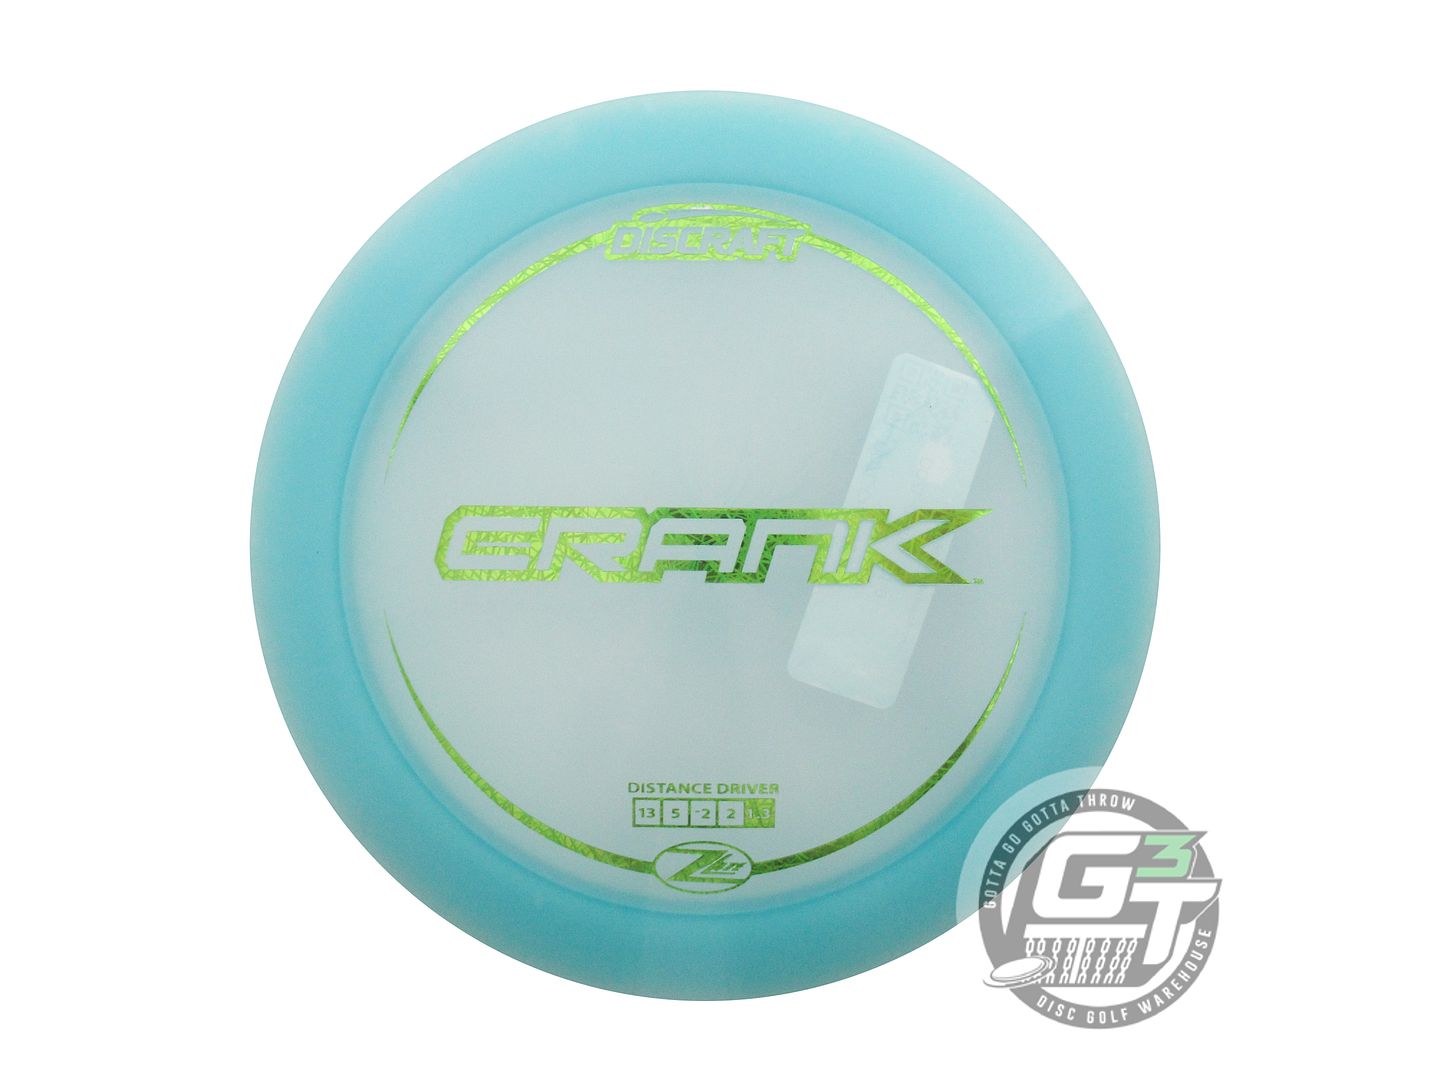 Discraft Z Lite Crank Distance Driver Golf Disc (Individually Listed)